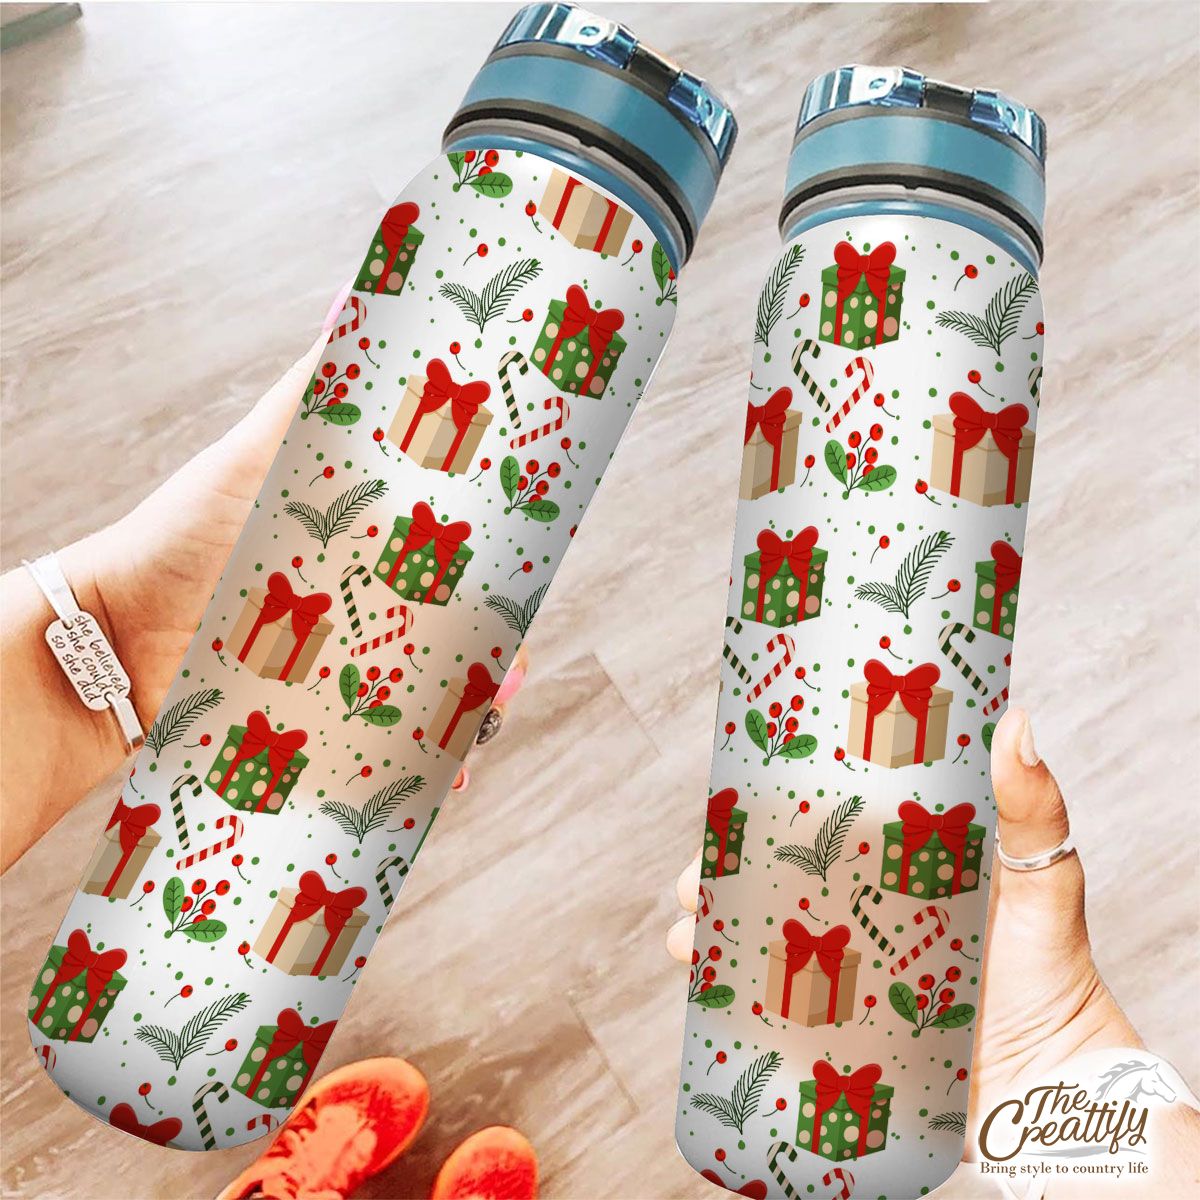 Christmas Gifts And Red Berries Tracker Bottle